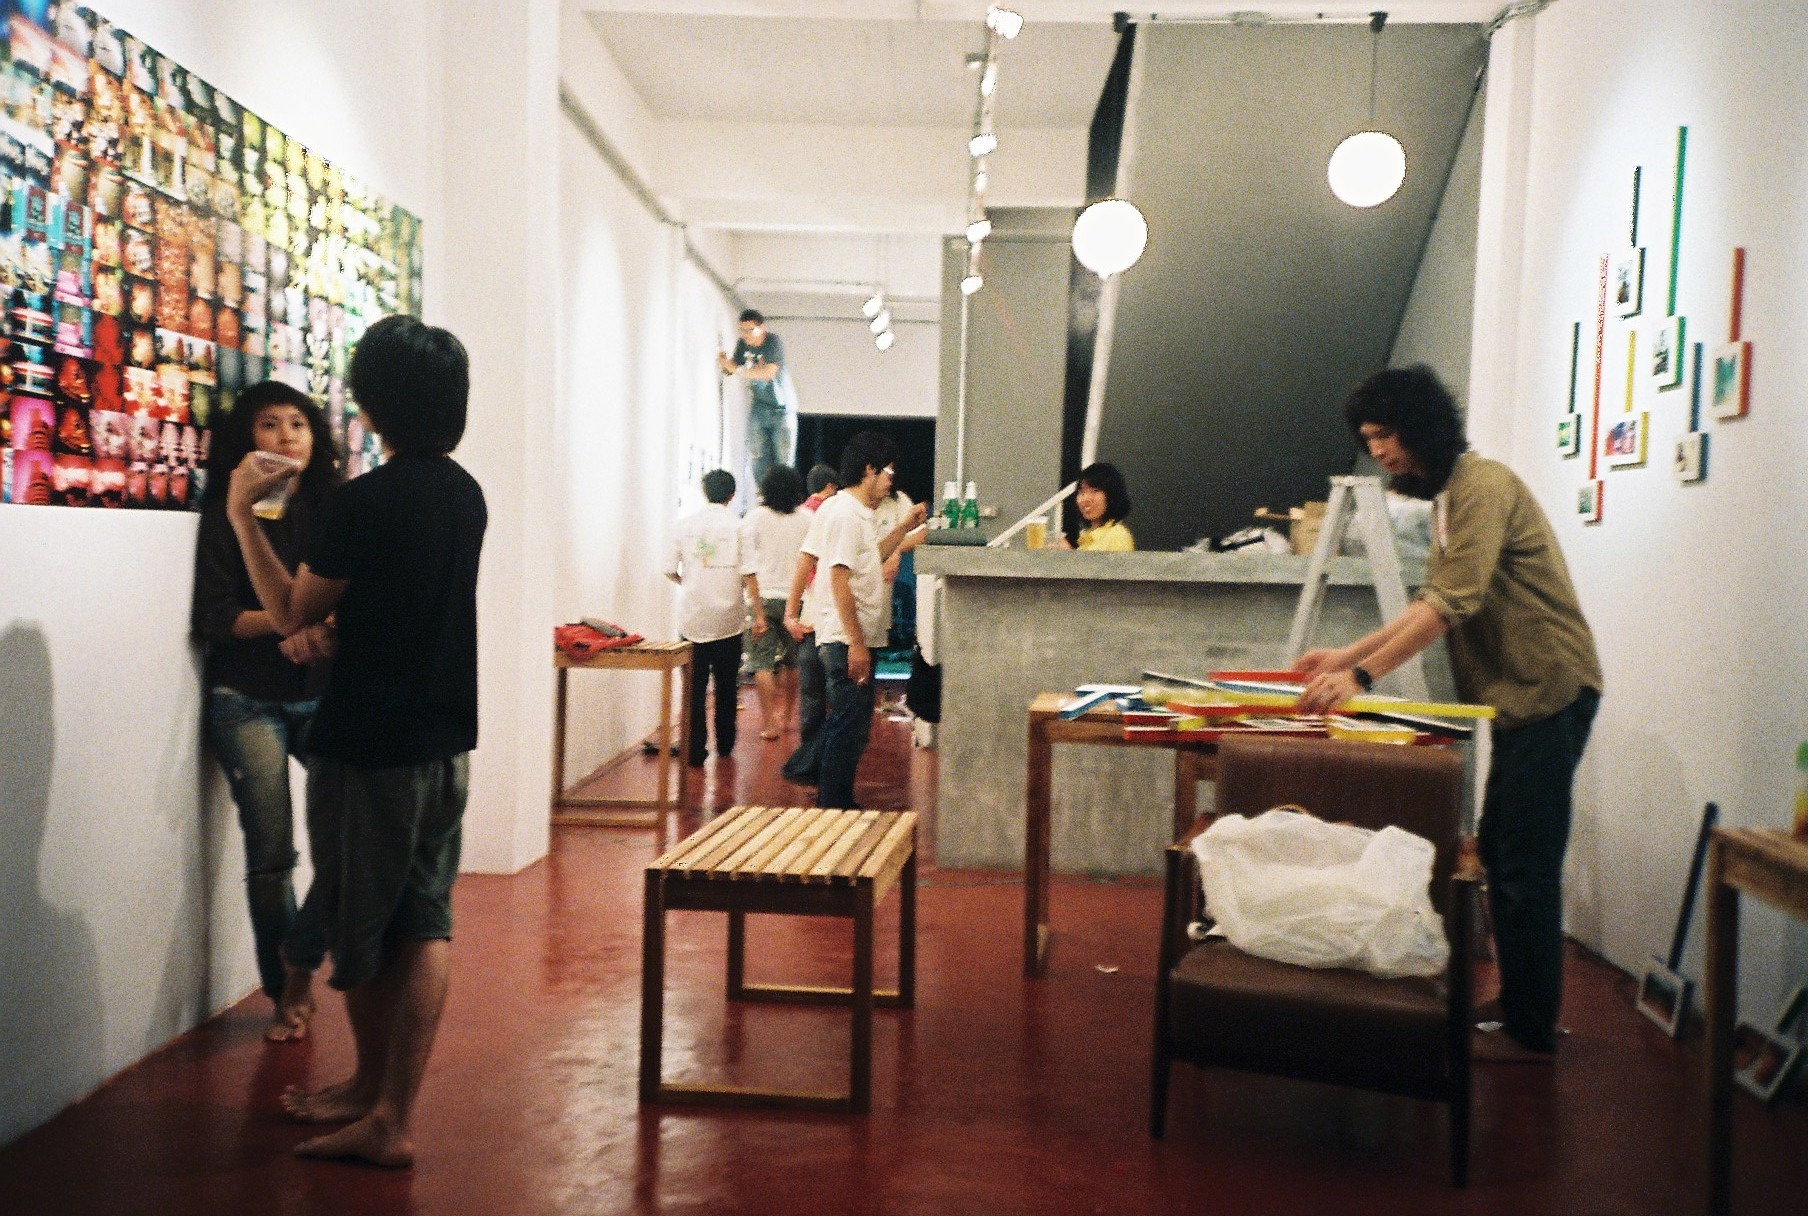 "Chiang Mai Impression (2007)" by filmone* group, the first exhibition at minimal. photo by Atikom Mukdaprakorn